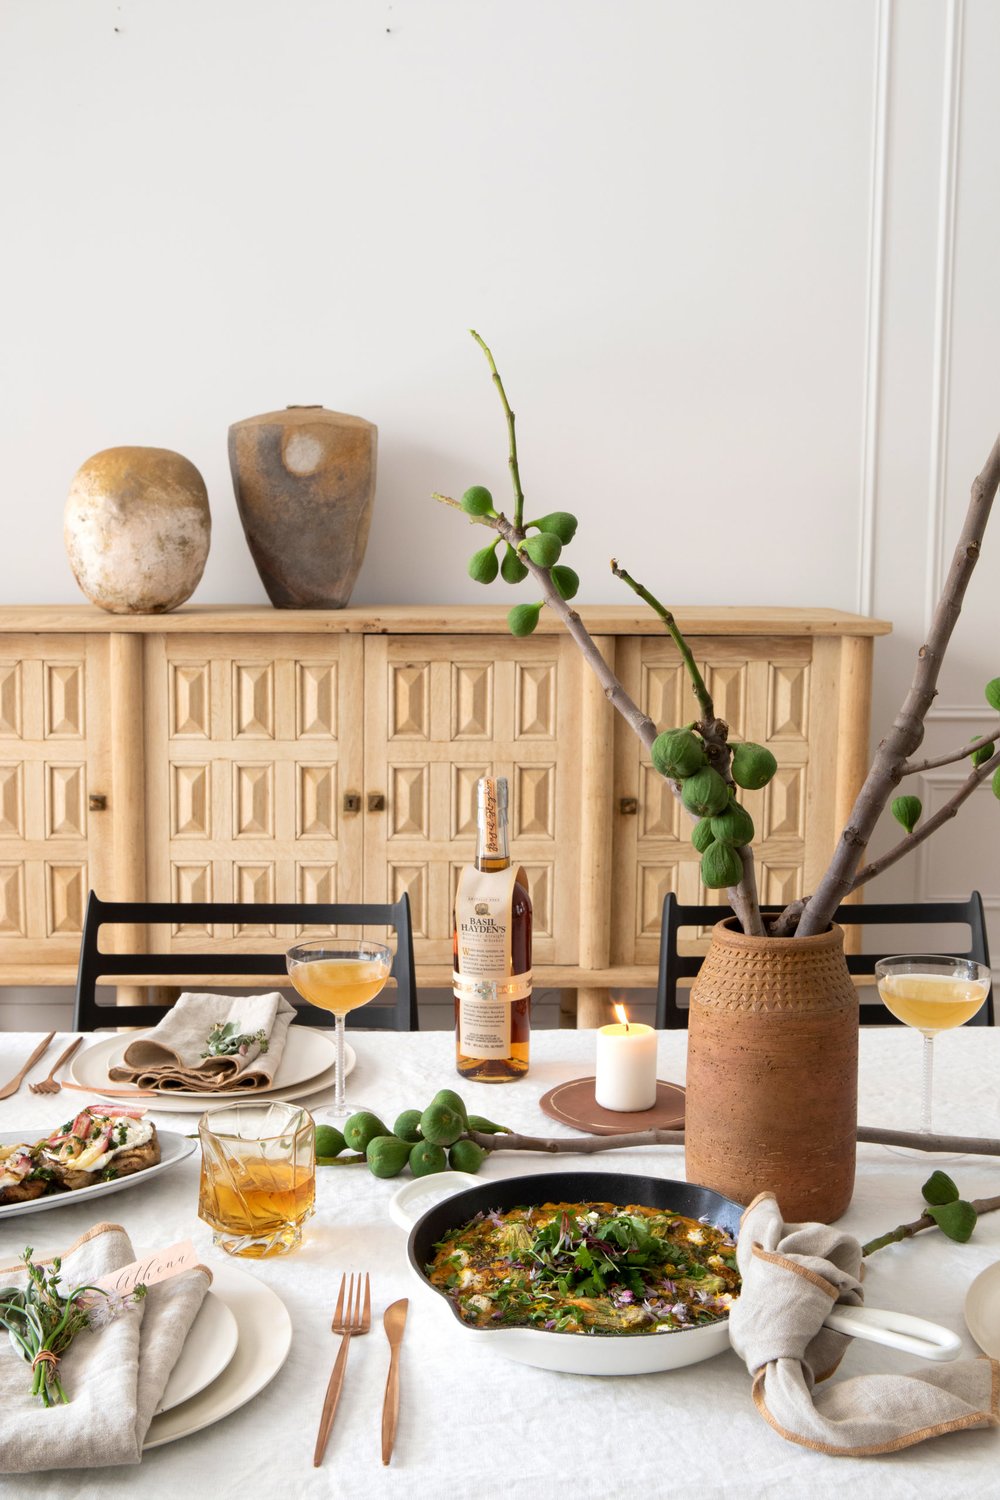 Easter Brunch Ideas From the Tablescape to the Menu and DIY Crafts